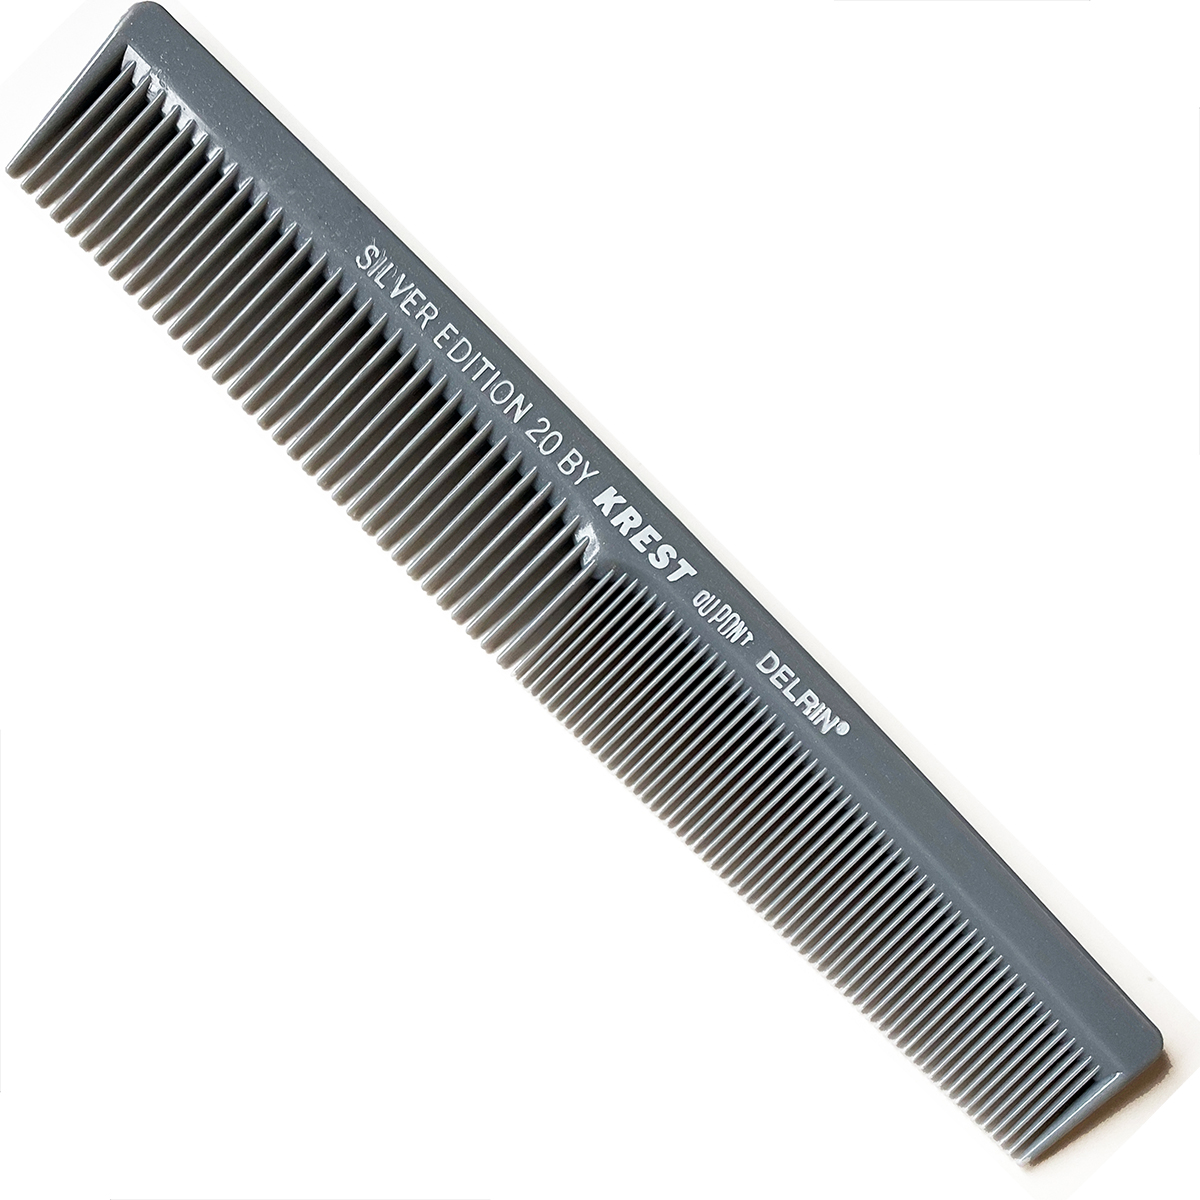 SE20 Silver Edition Flat/square back larger cutting comb